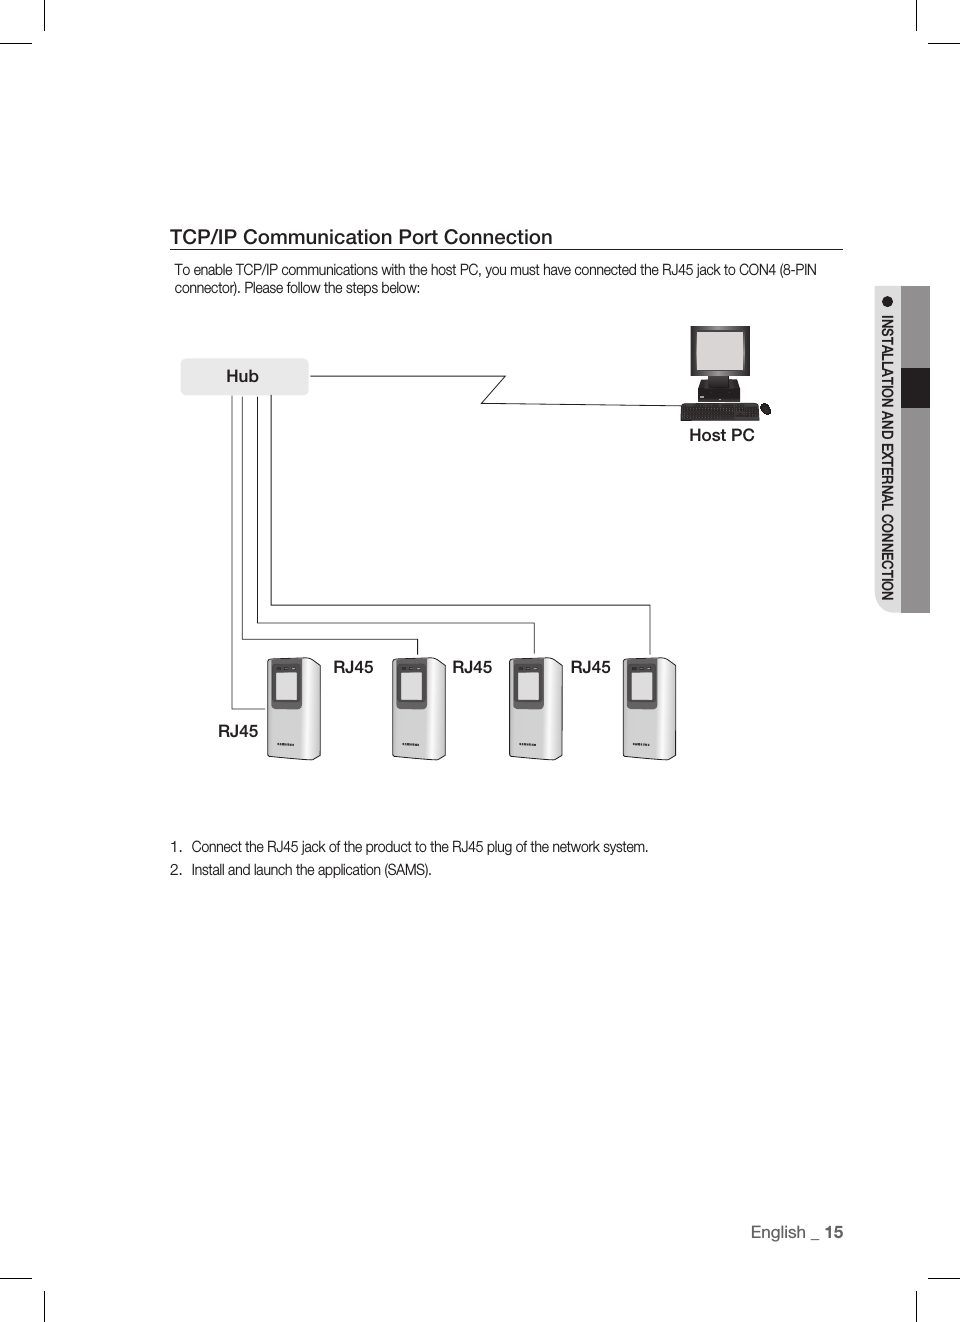 Englis_ English _ 15INSTALLATION AND EXTERNAL CONNECTIONTCP/IP Communication Port ConnectionTo enable TCP/IP communications with the host PC, you must have connected the RJ45 jack to CON4 (8-PIN connector). Please follow the steps below:Connect the RJ45 jack of the product to the RJ45 plug of the network system.Install and launch the application (SAMS).1.2.HubRJ45RJ45 RJ45 RJ45Host PC